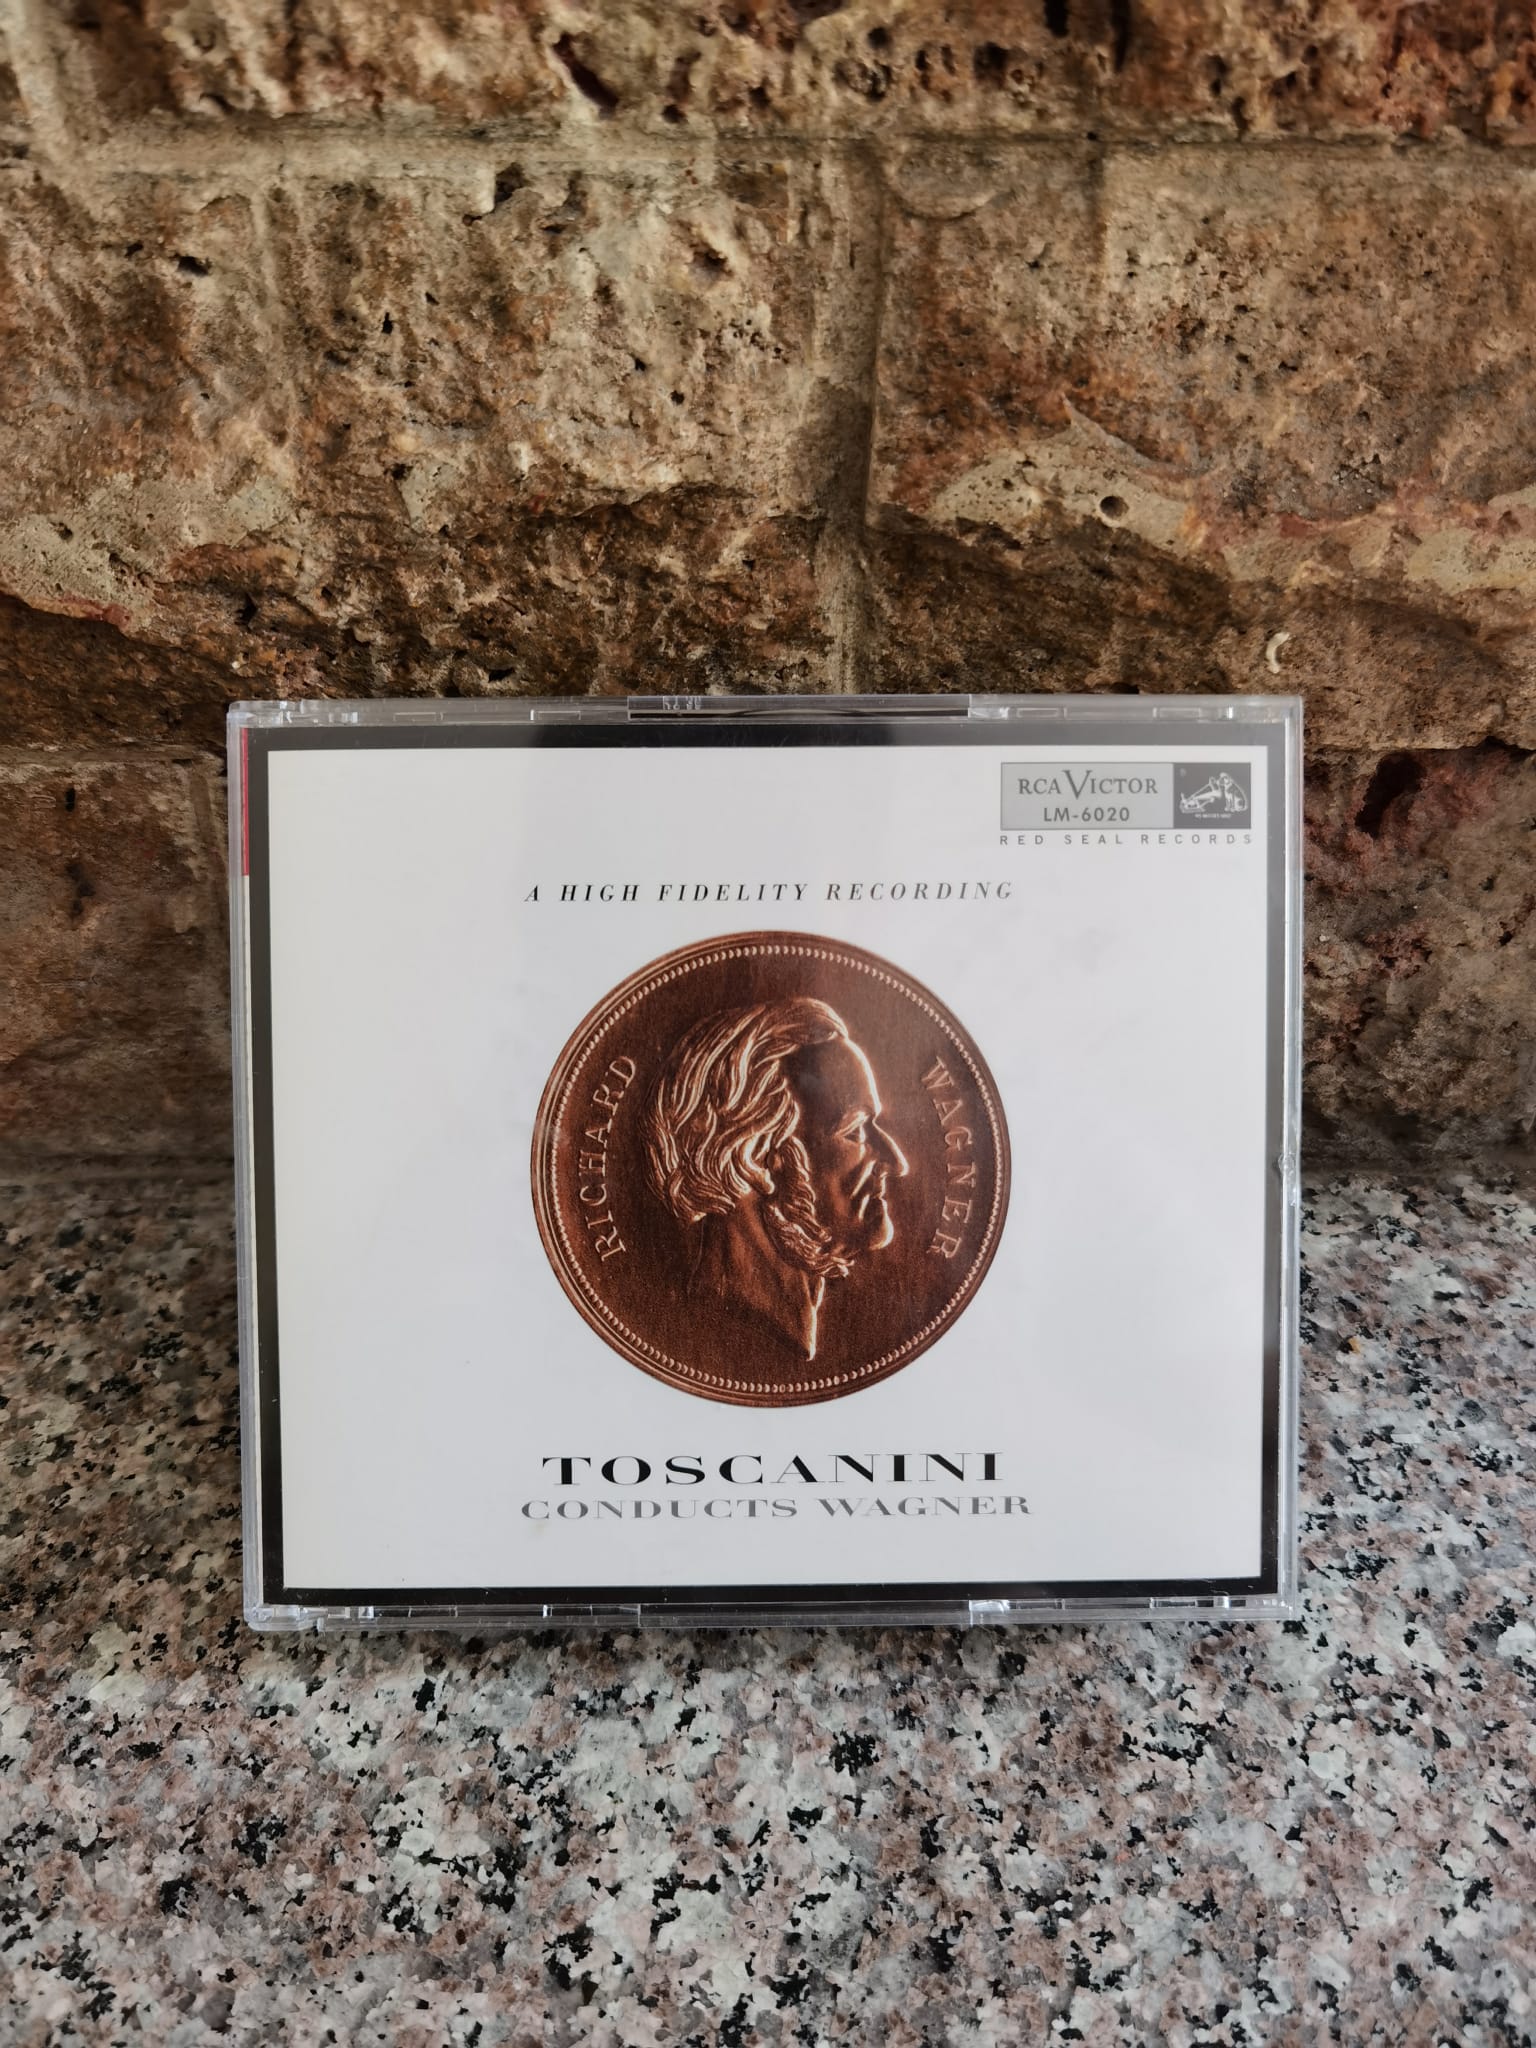 set 5 cd toscanini: conducts wagner, sony music                                                      -                                                                                                   